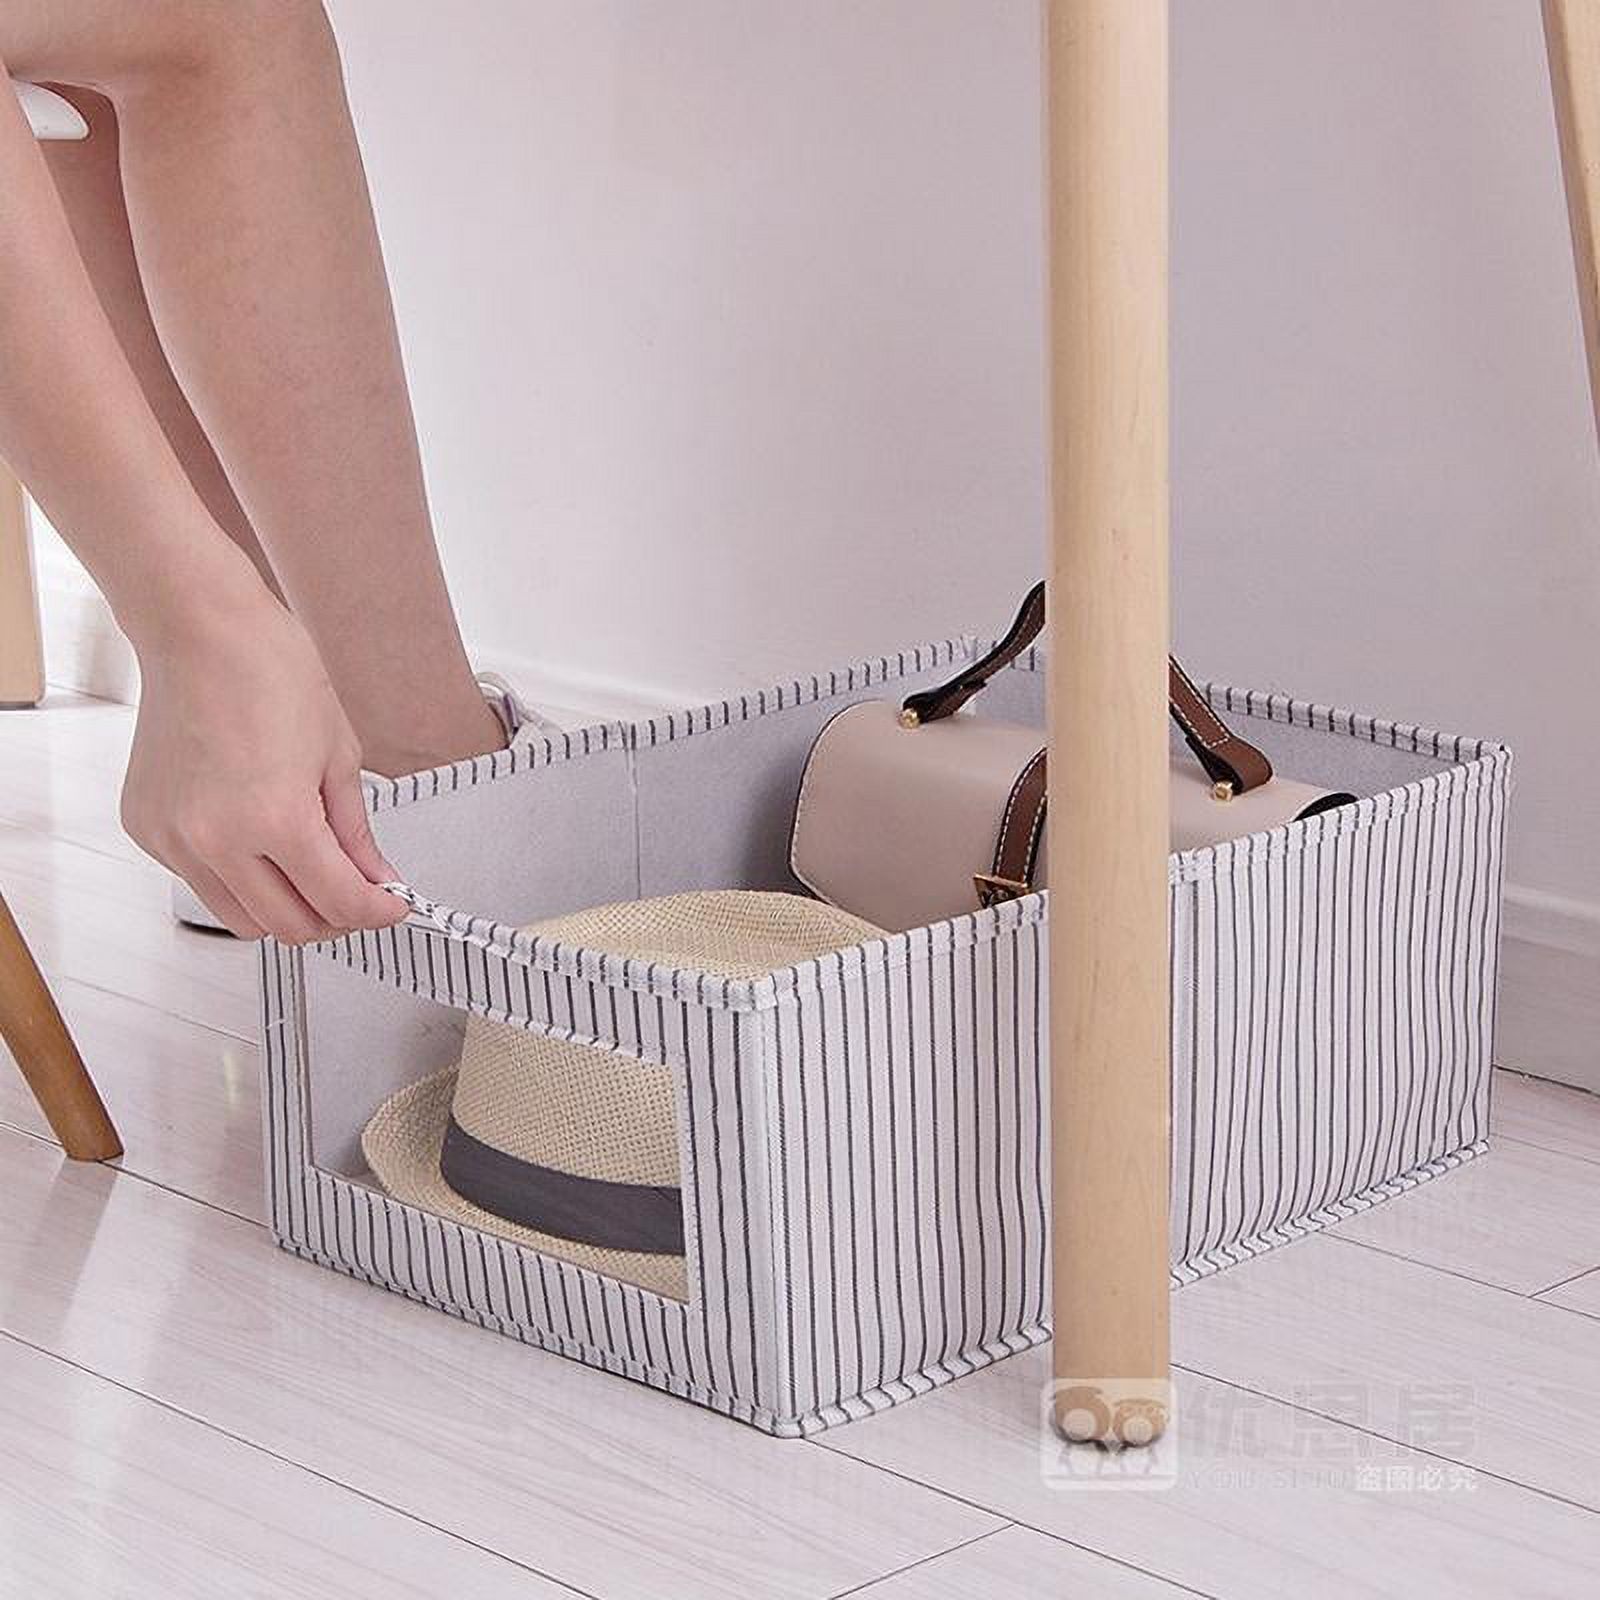 Uncovered Folding Storage Box Hollow Out Clothes Storage Box Storage Box Foldable Storage Box And Toy Clothes Storage Box Sundries And Cosmetics Storage - image 5 of 9